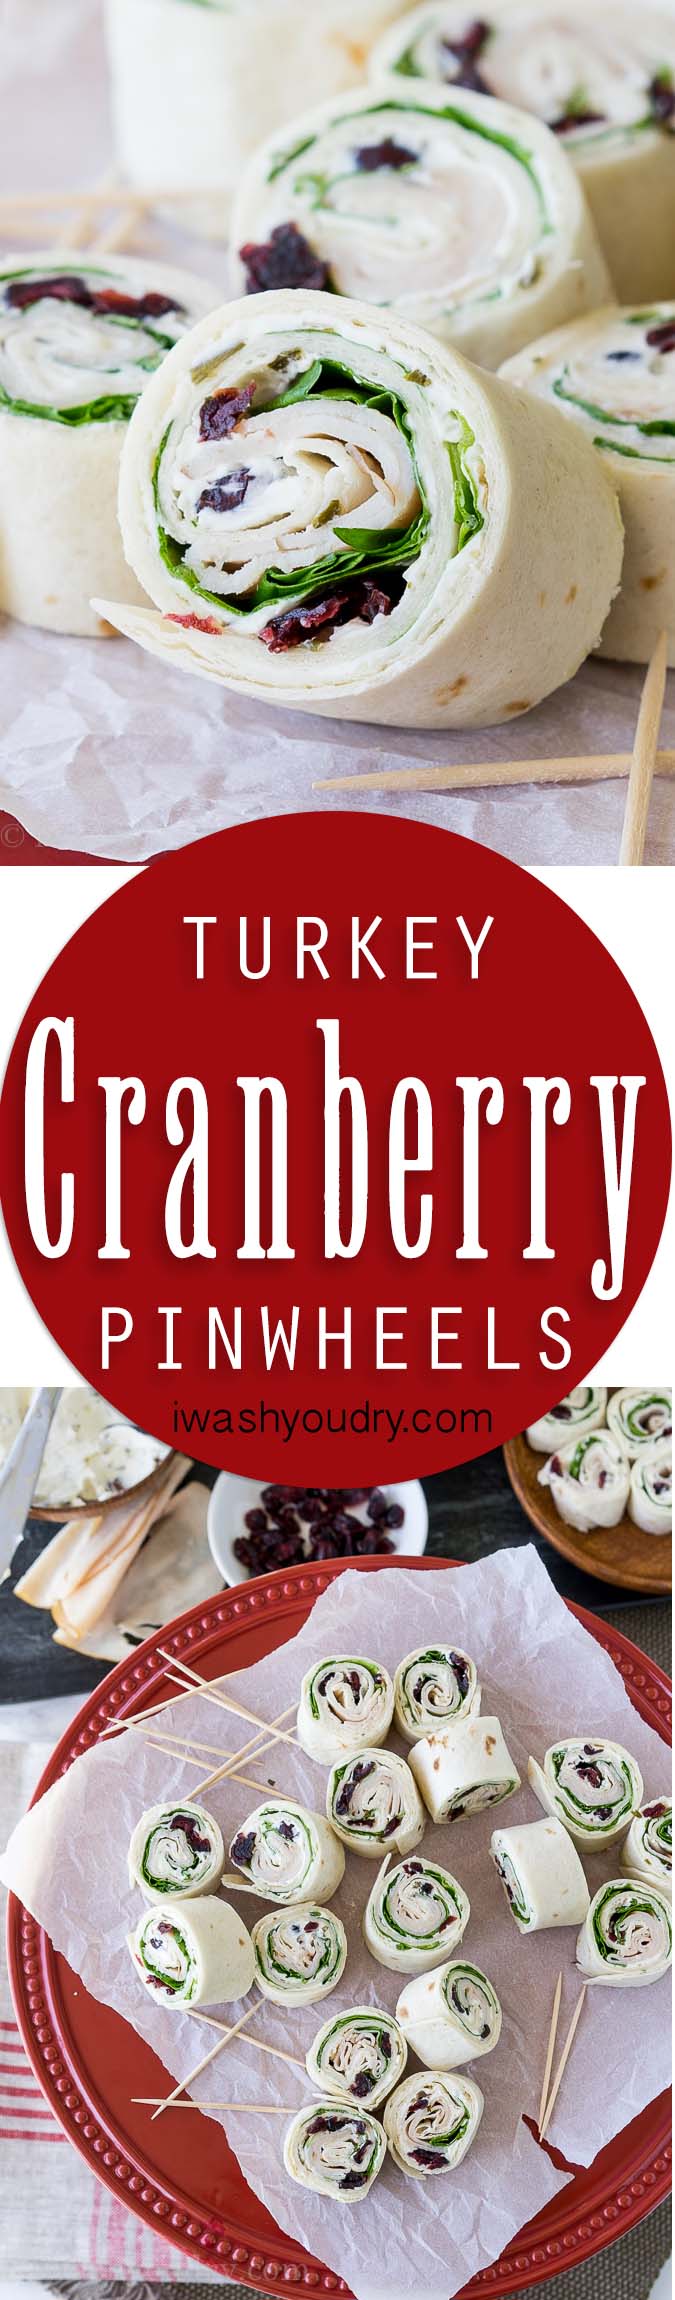 These Turkey Cranberry Pinwheels are filled with a creamy cream cheese, spinach, turkey and cranberries! Perfect for lunch or appetizers!